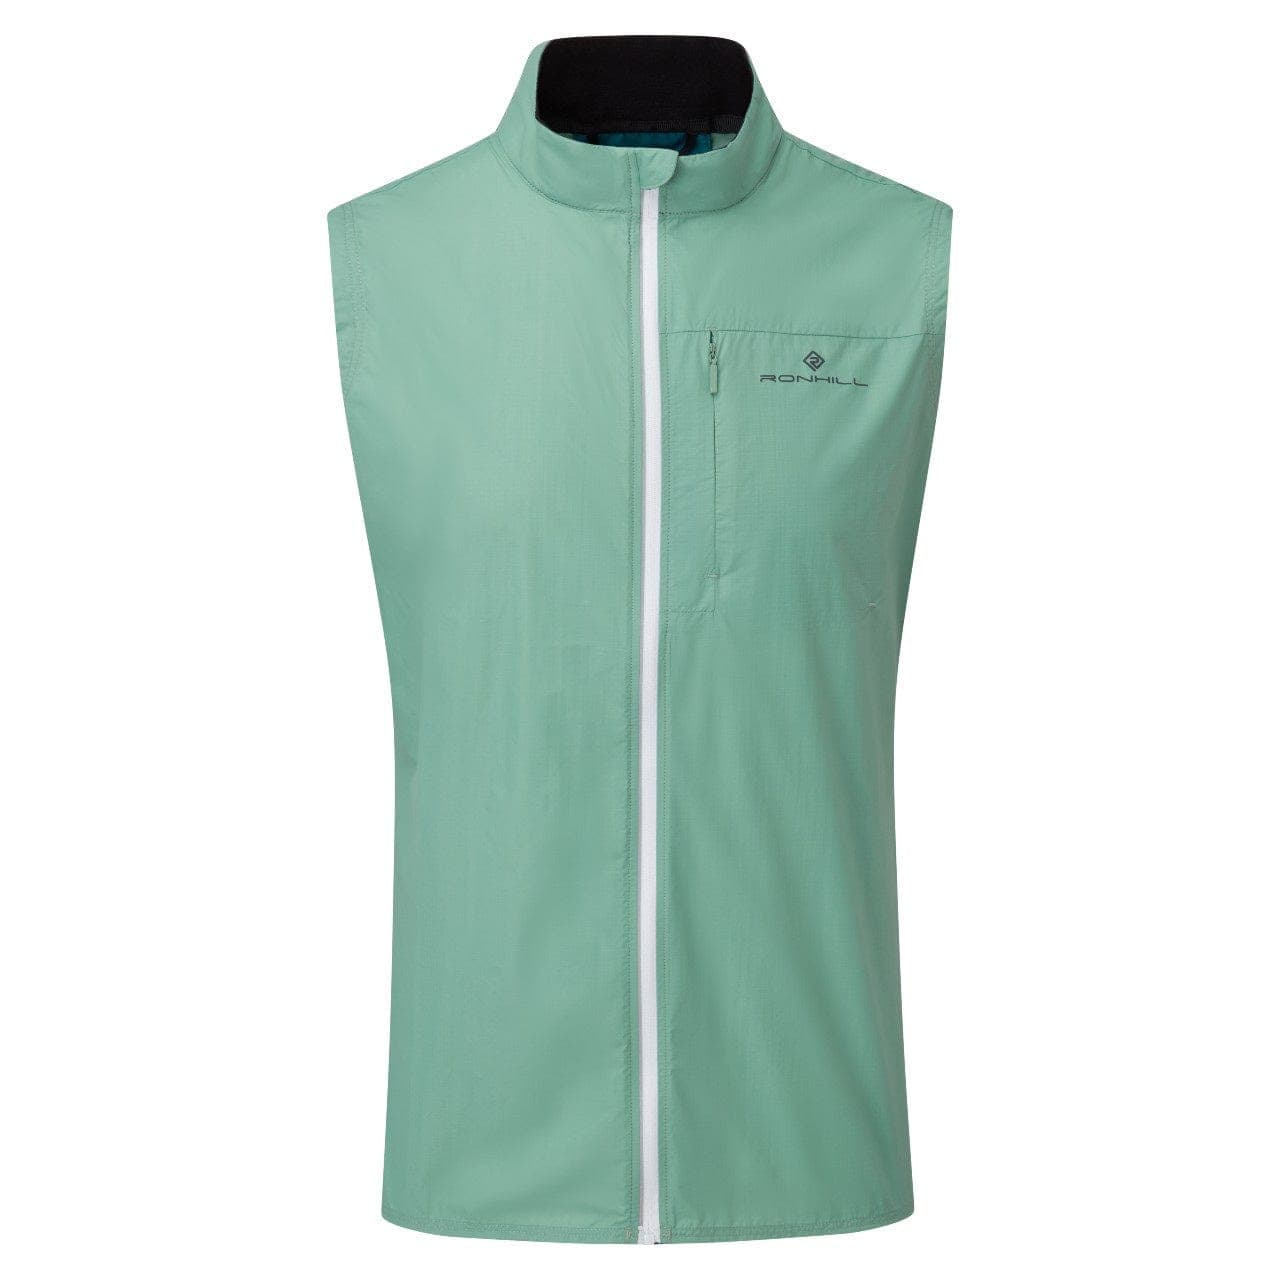 Ronhill Tech LTW Gilet  (Mens) - Willow/Bright White